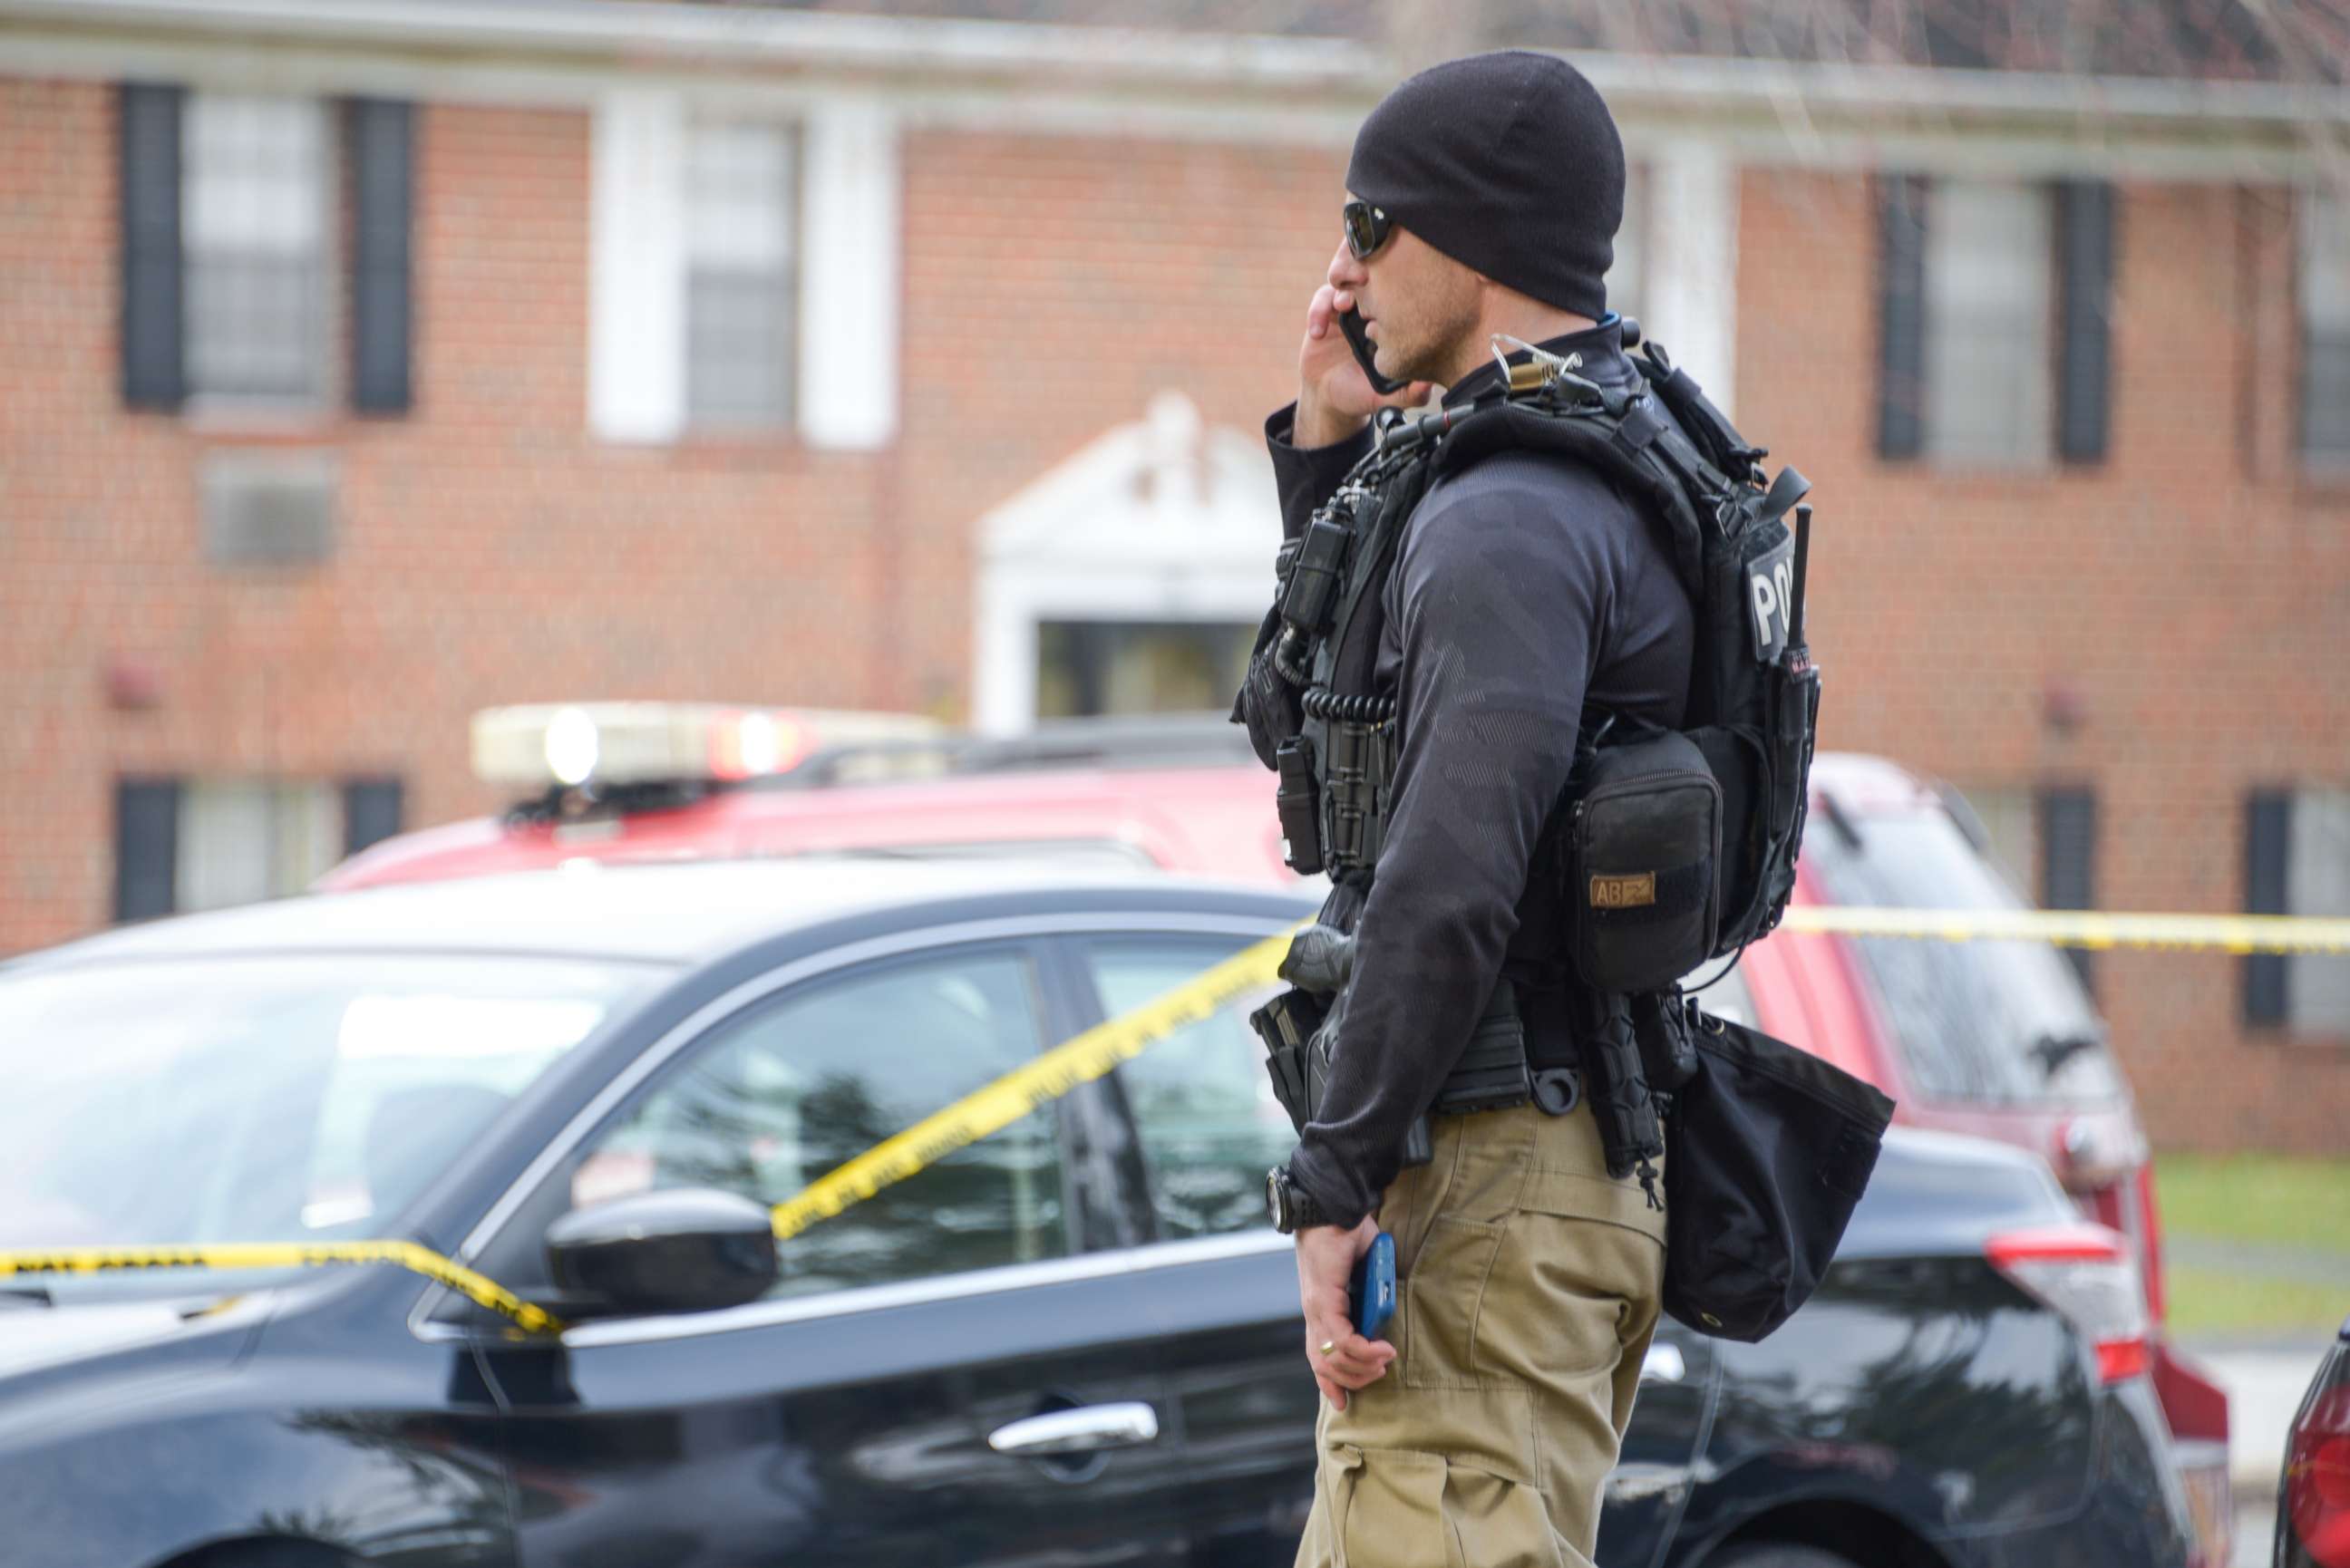 PHOTO: Law enforcement personnel work at the scene of a shooting, Wednesday, Feb. 12, 2020, in Baltimore. Two law enforcement officers with a fugitive task force were injured and a suspect died in the shooting, the U.S. Marshals Service said.